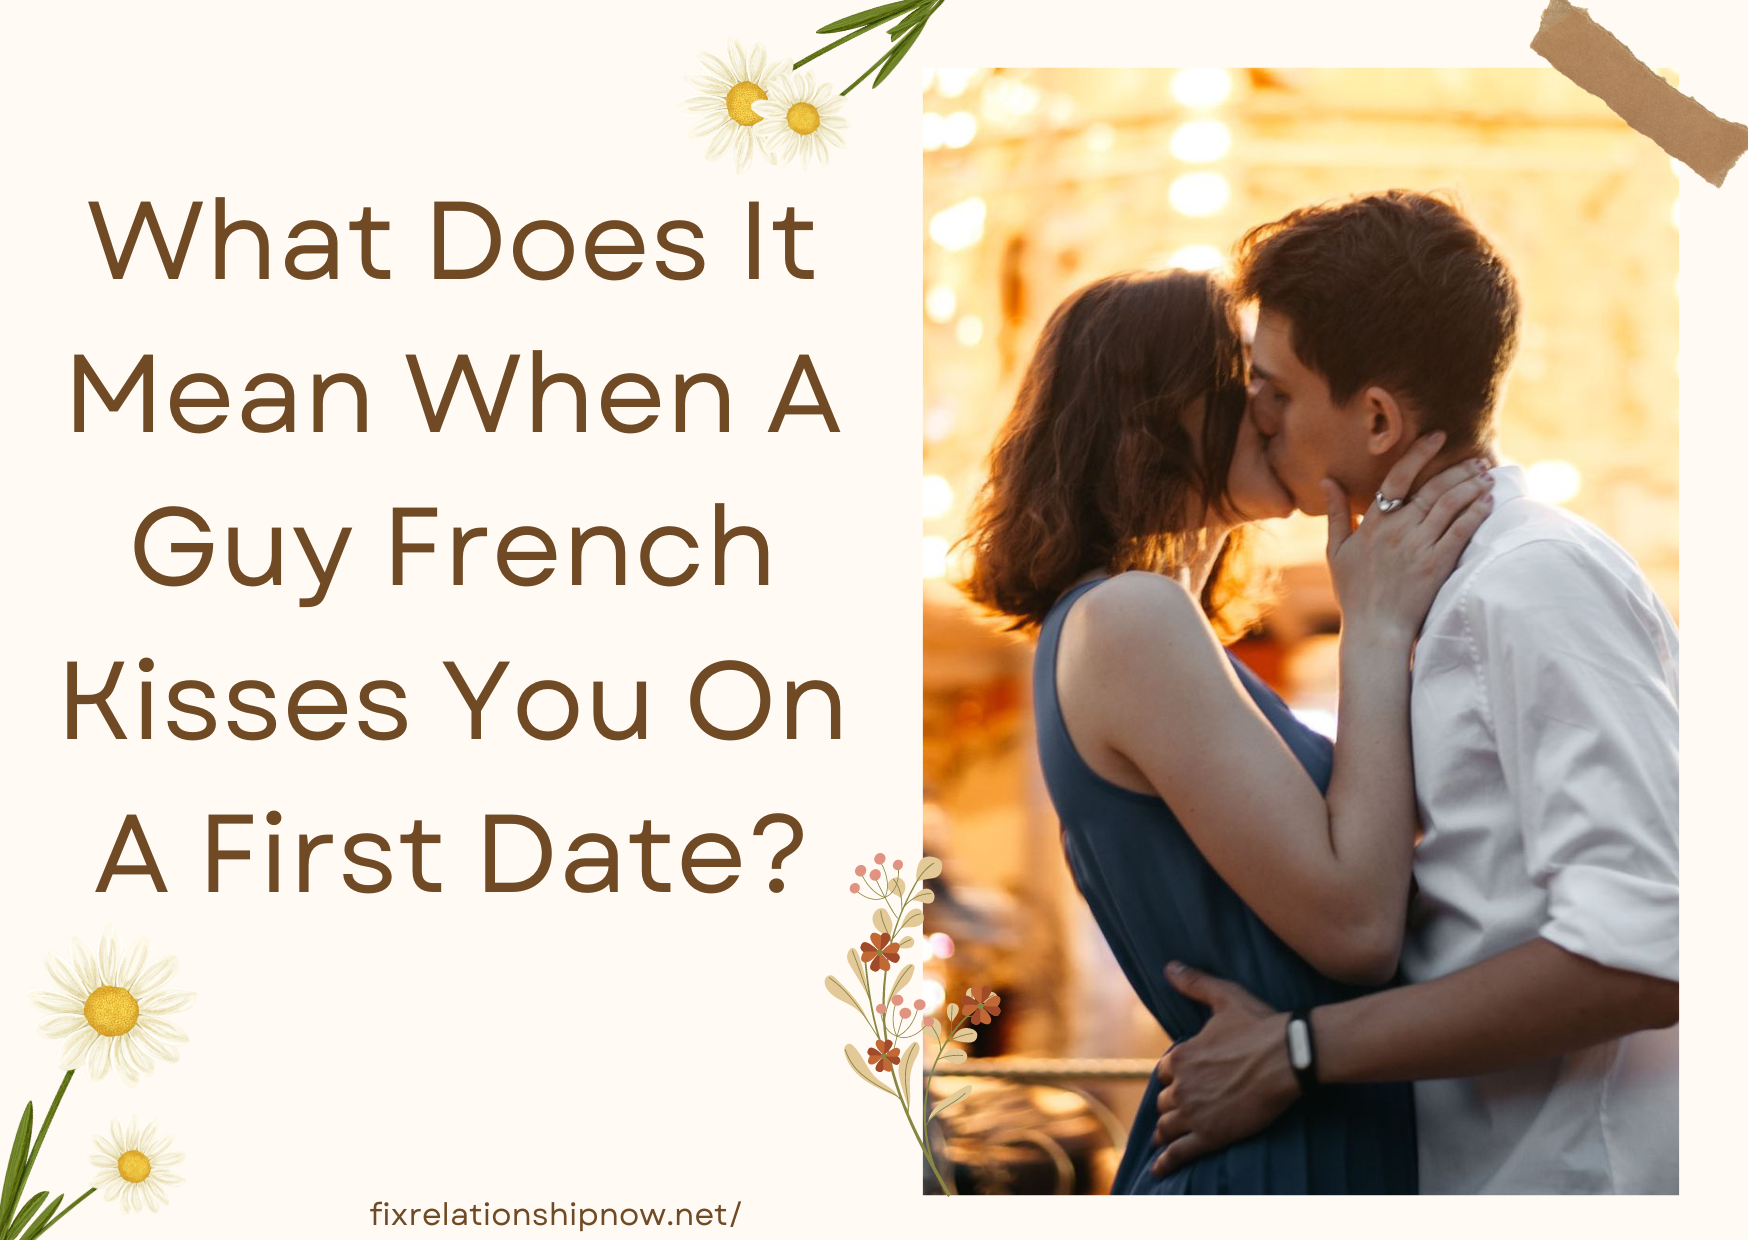 What Does It Mean When A Guy French Kisses You On A First Date